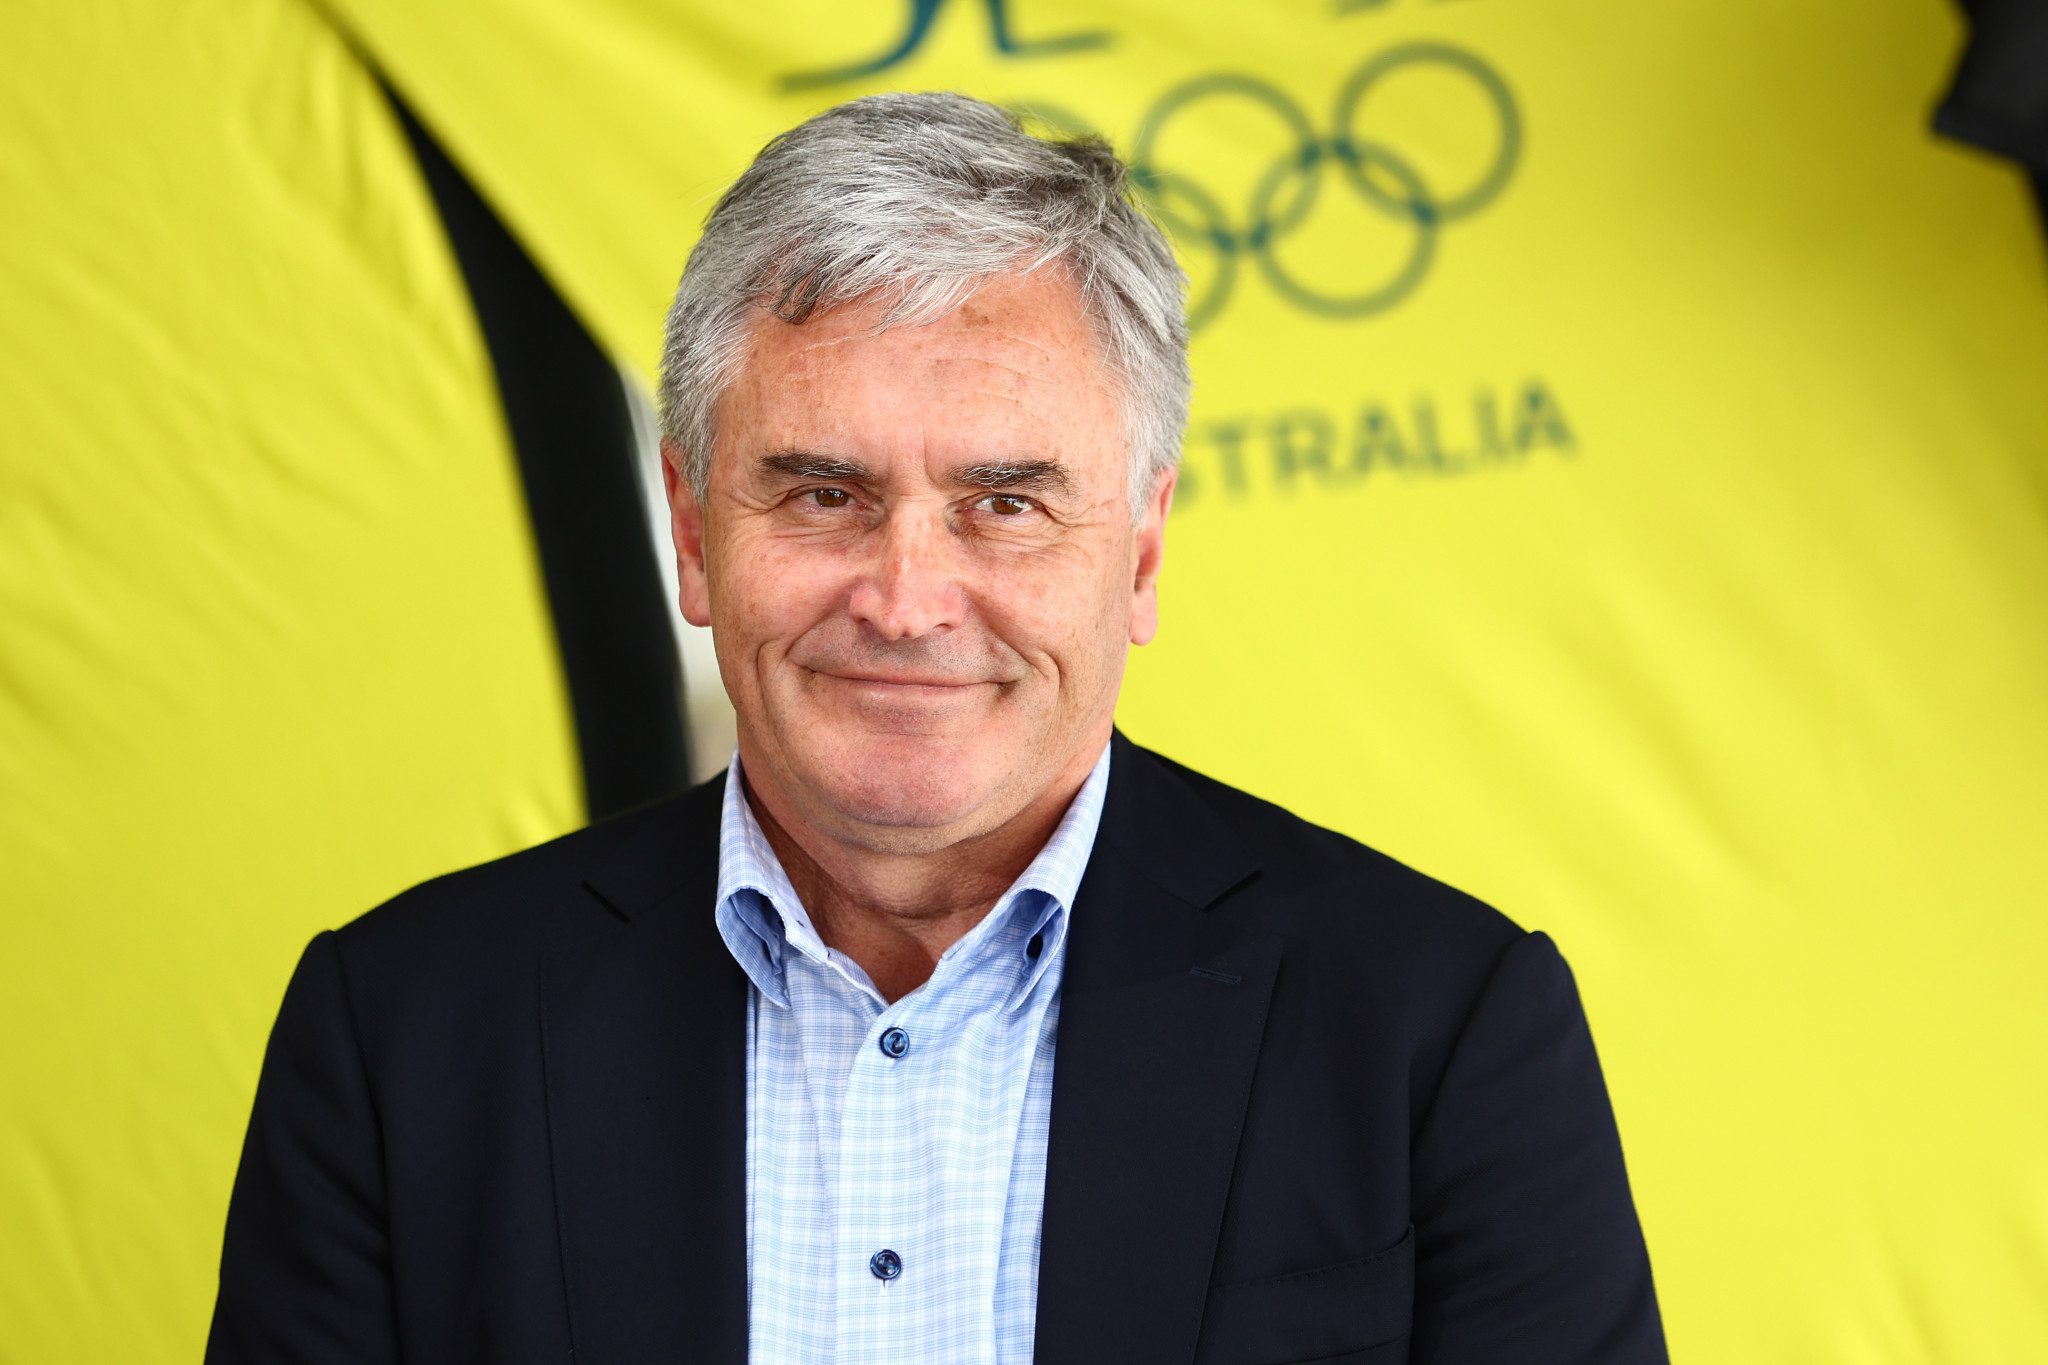 Ian Chesterman says they aim to improve mental and physical health of Australians in the build up to Brisbane 2032 ©Getty Images